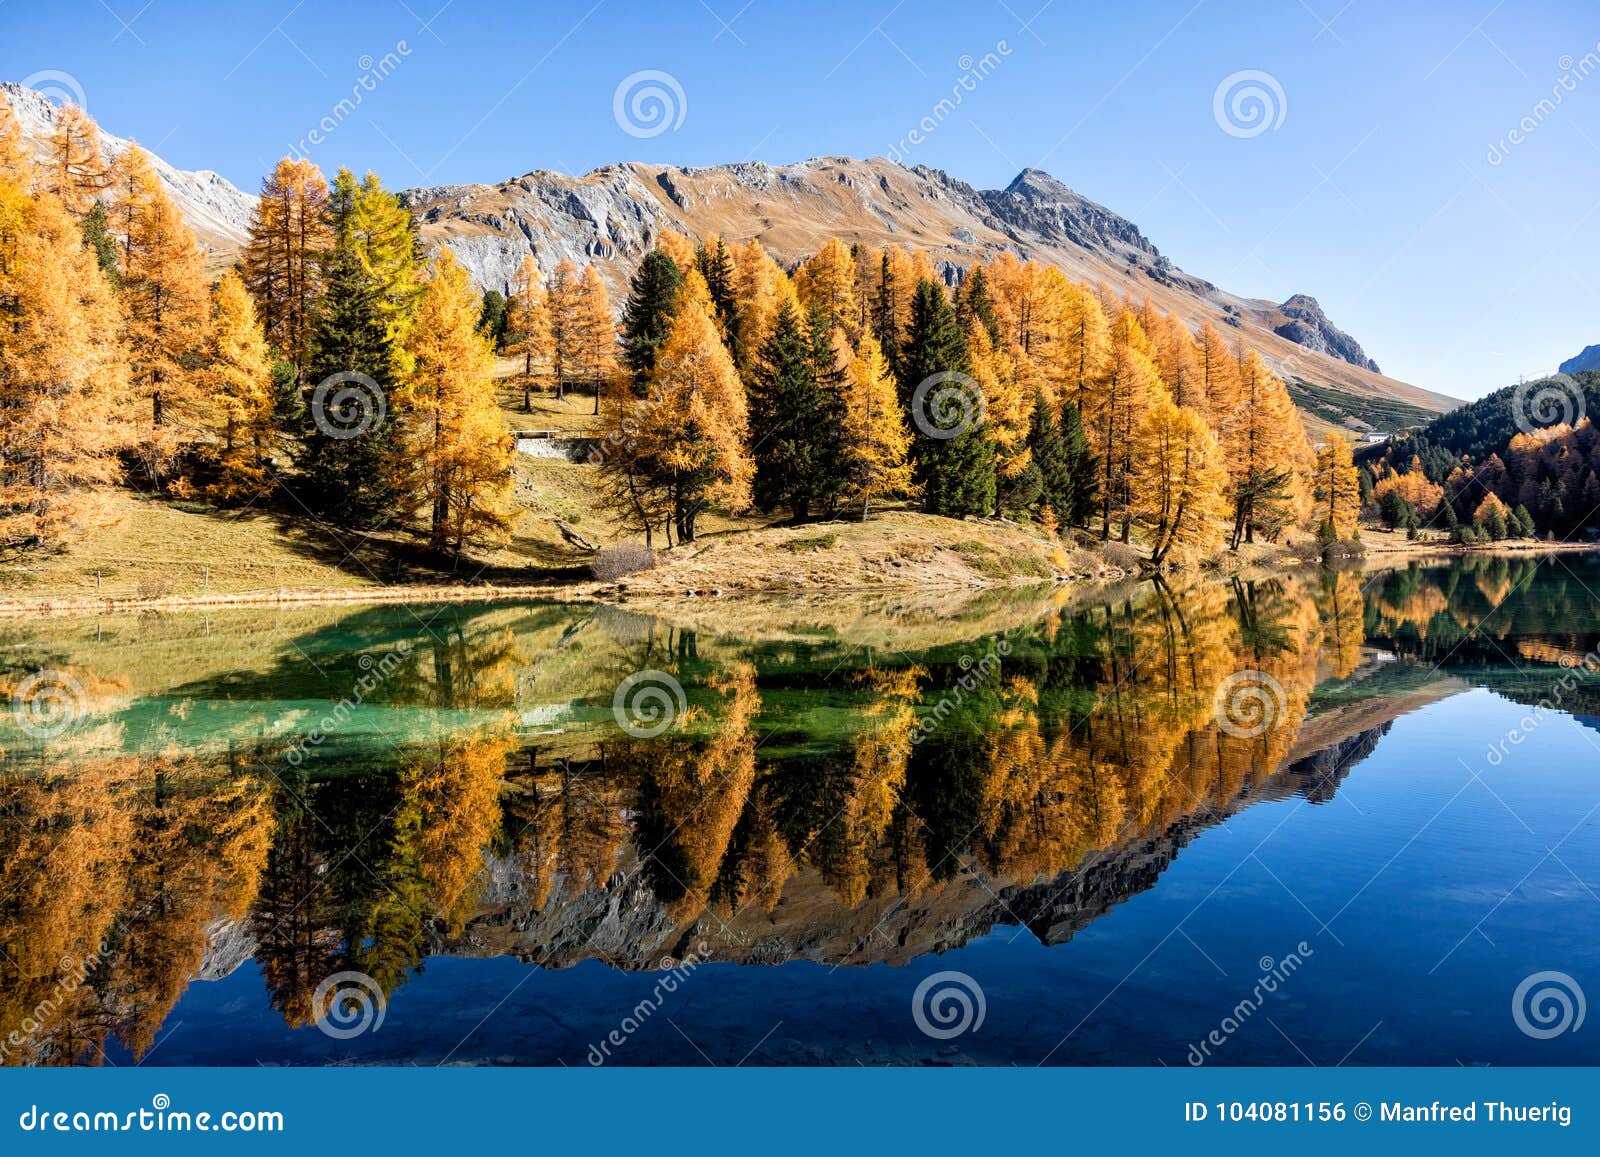 stunning view of the palpuogna lake near albula pass with golden trees in autumn